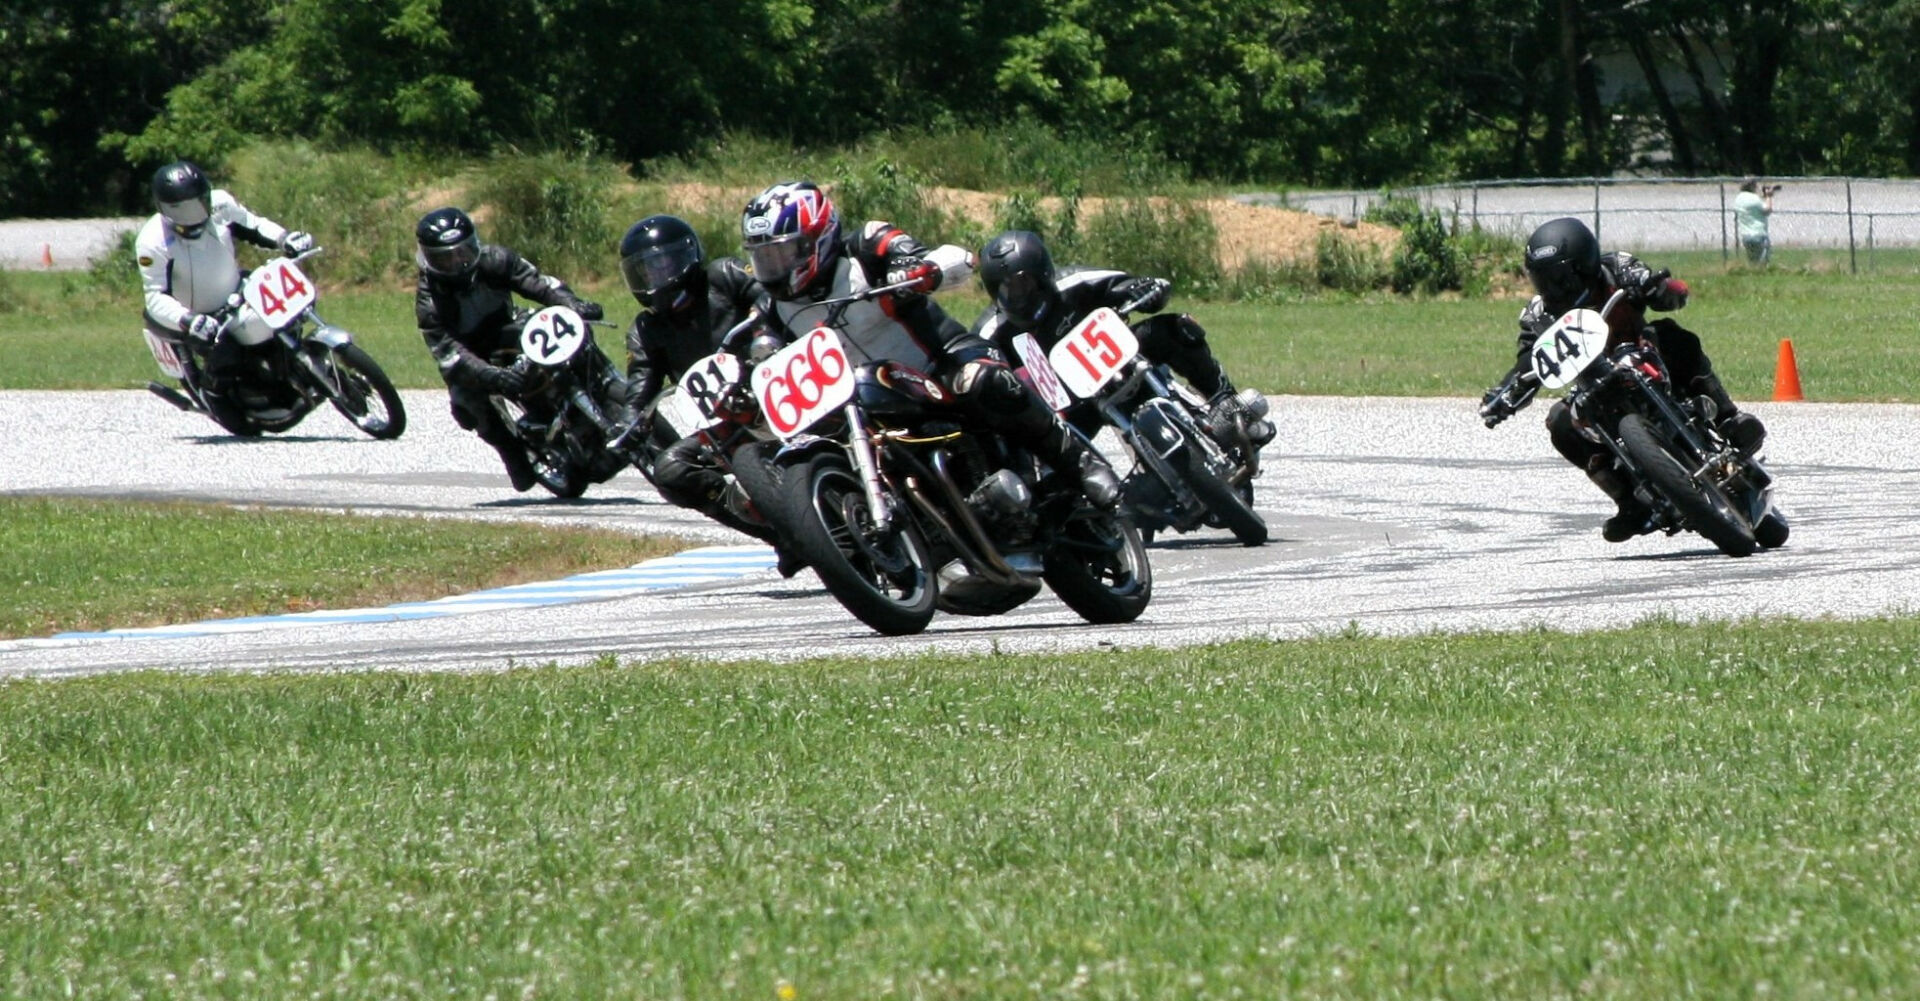 Mark Smithard (666), Will Meyer (15), Steven Filippini (44), Stephen Aretz (44X), Ralph Wessell (81), and Grant Spence (24) as seen during the combined Novice Historic Production Heavyweight/Class C Handshift/Class C Footshift race at Talladega Gran Prix Raceway. Photo by Felecia Foxx, courtesy AHRMA.